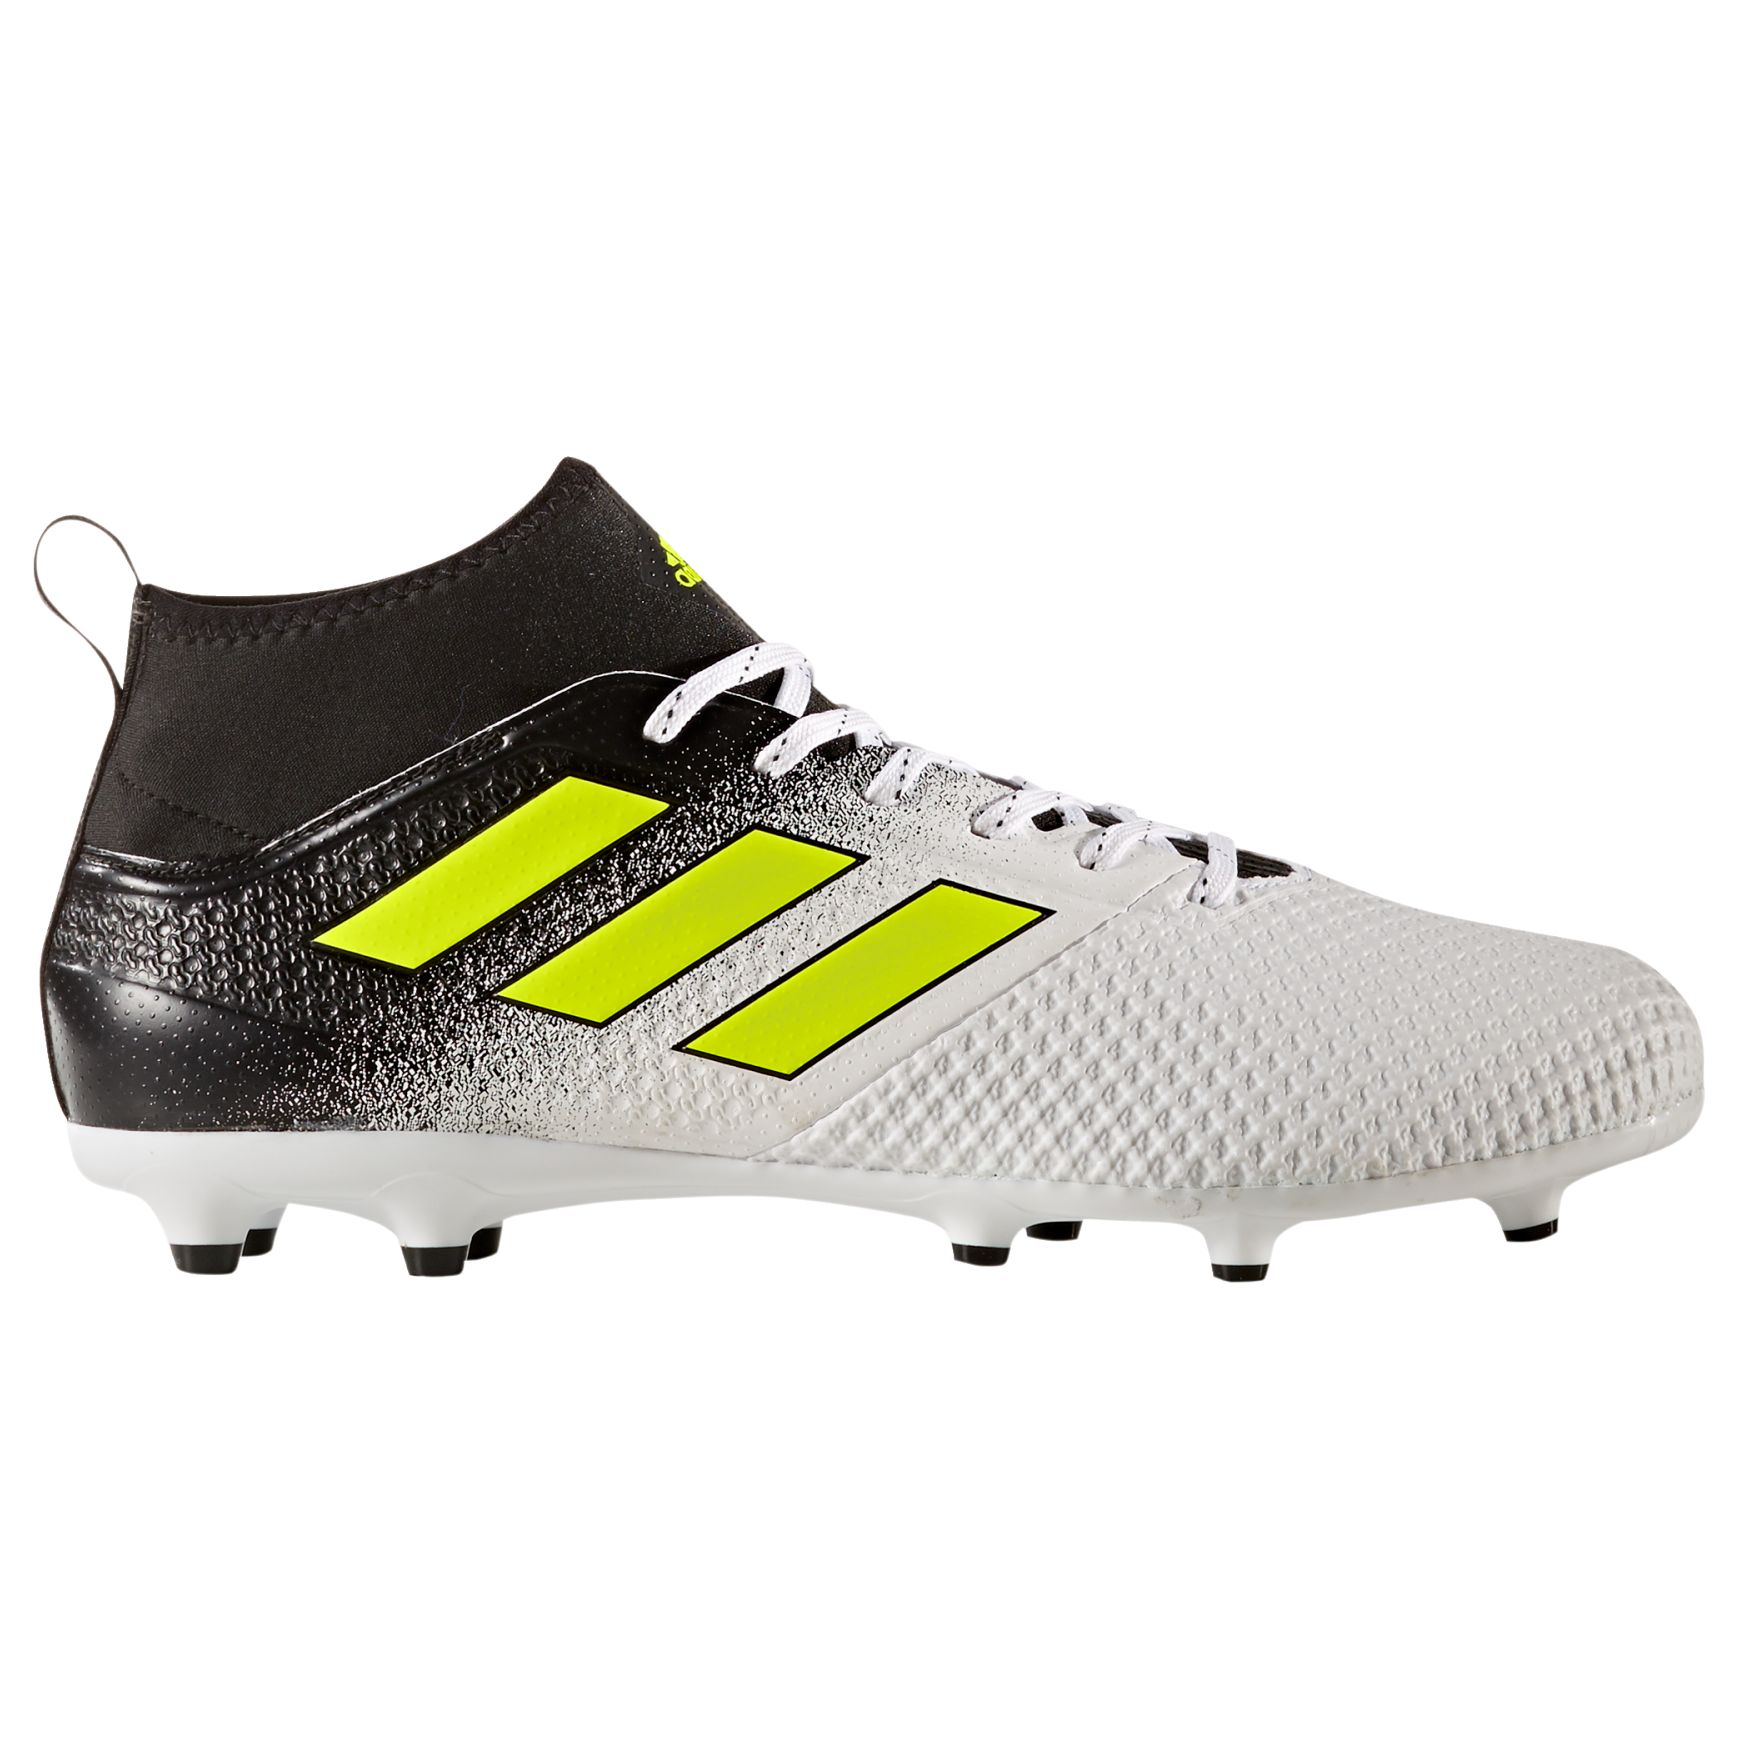 adidas ace 17.3 firm ground mens football boots black